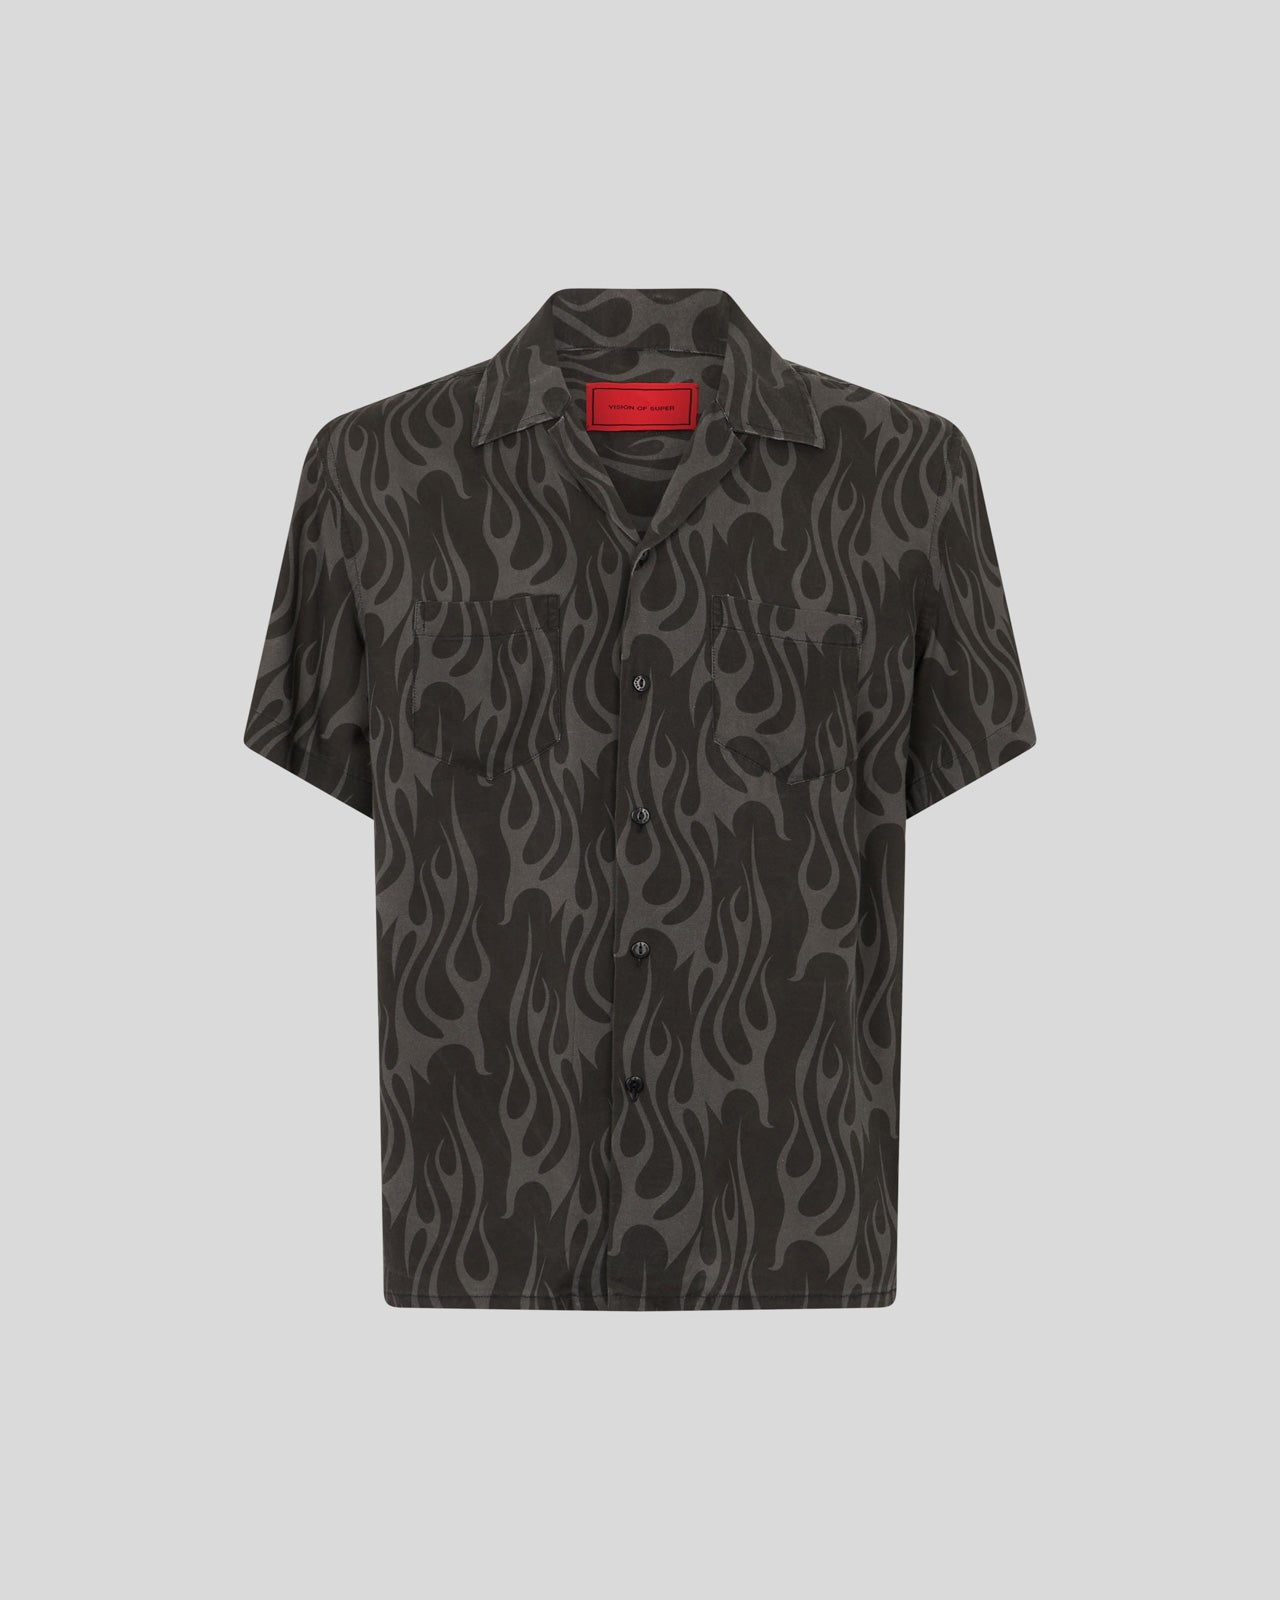 BLACK SHIRT WITH ALL OVER FLAMES PRINT AND METAL LABEL